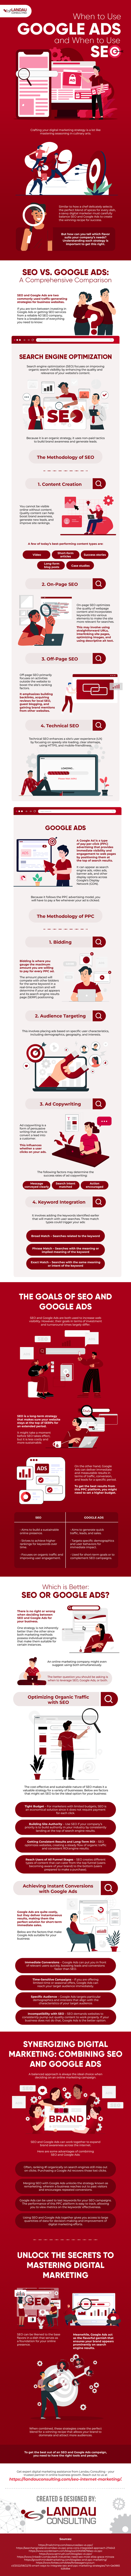 When to Use Google Ads and When to Use SEO Infographic Image 09